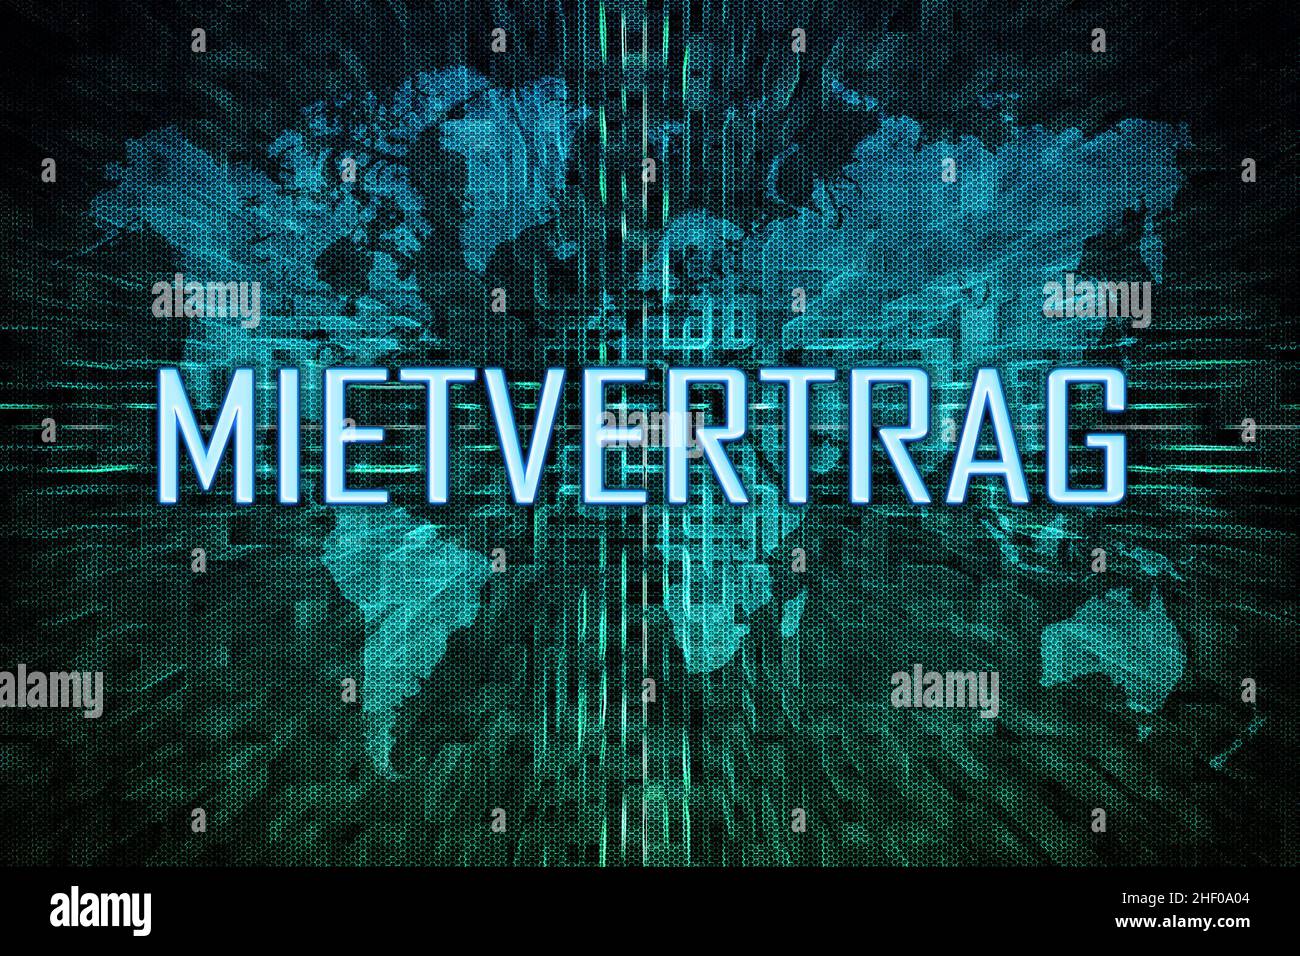 Mietvertrag - german word for rent contract or lease agreement - text concept on green digital world map background. Stock Photo